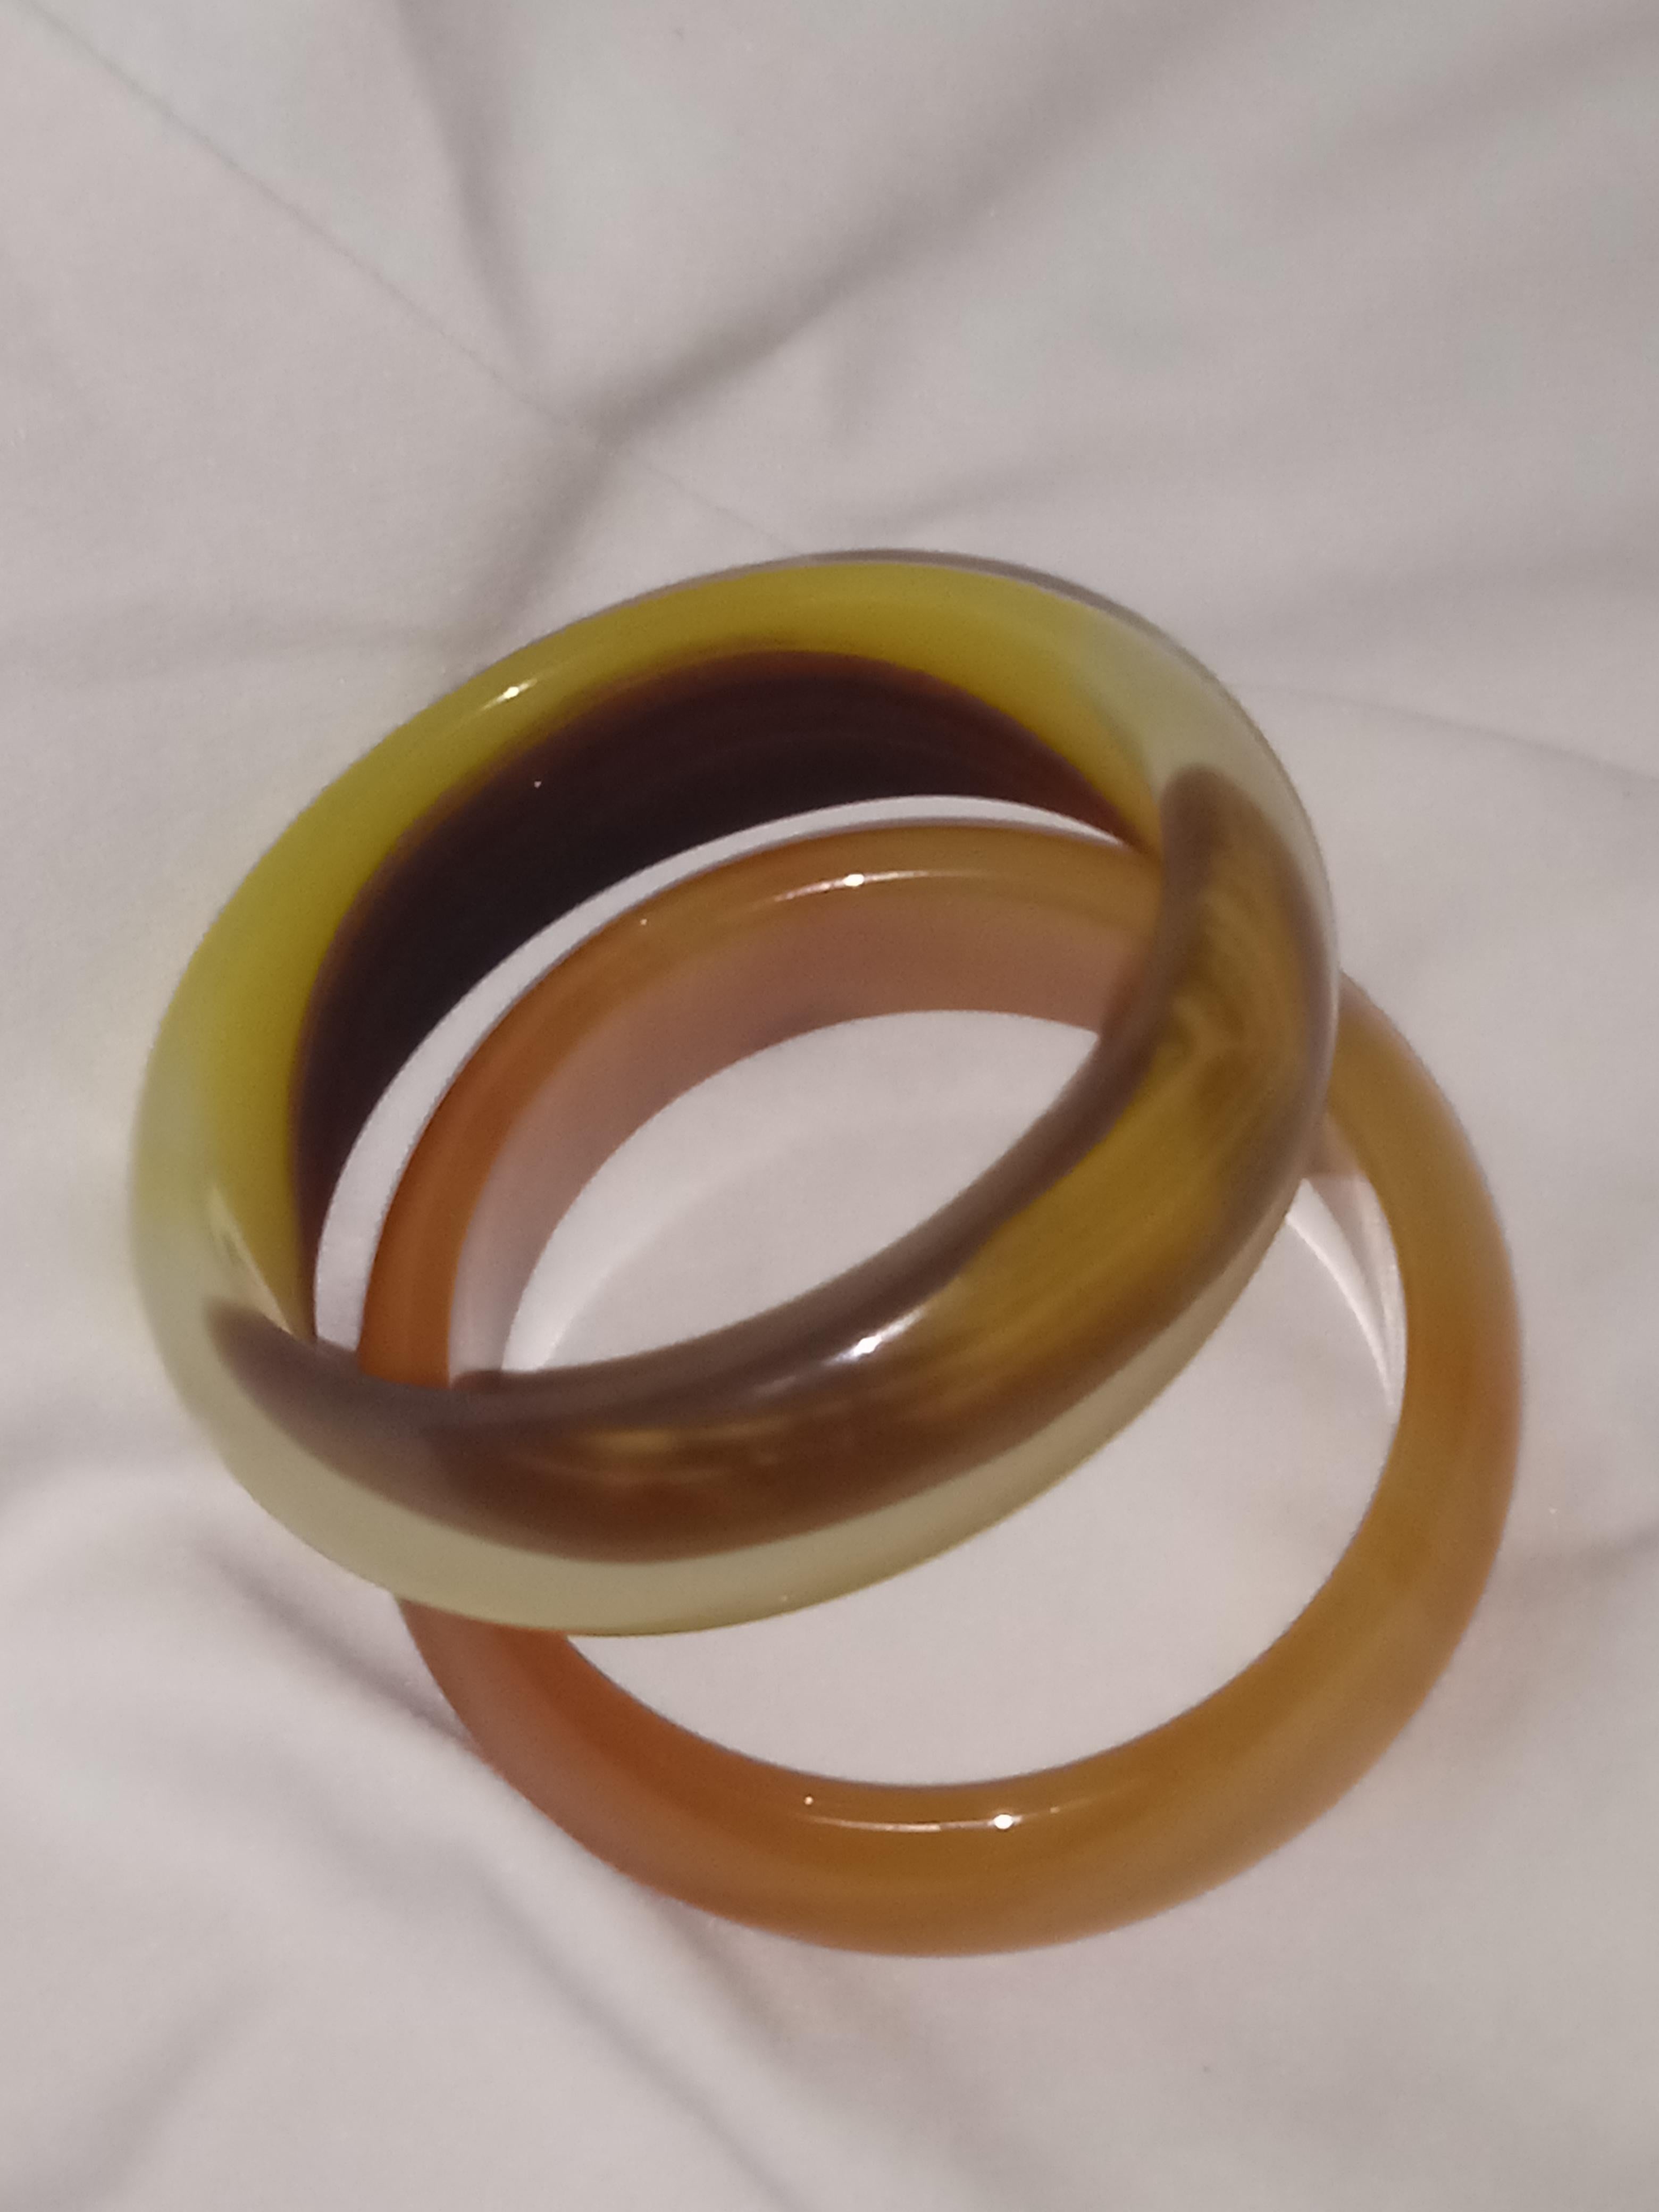 Natural Agate gem stone bangles pair  - Sculpture by Unknown